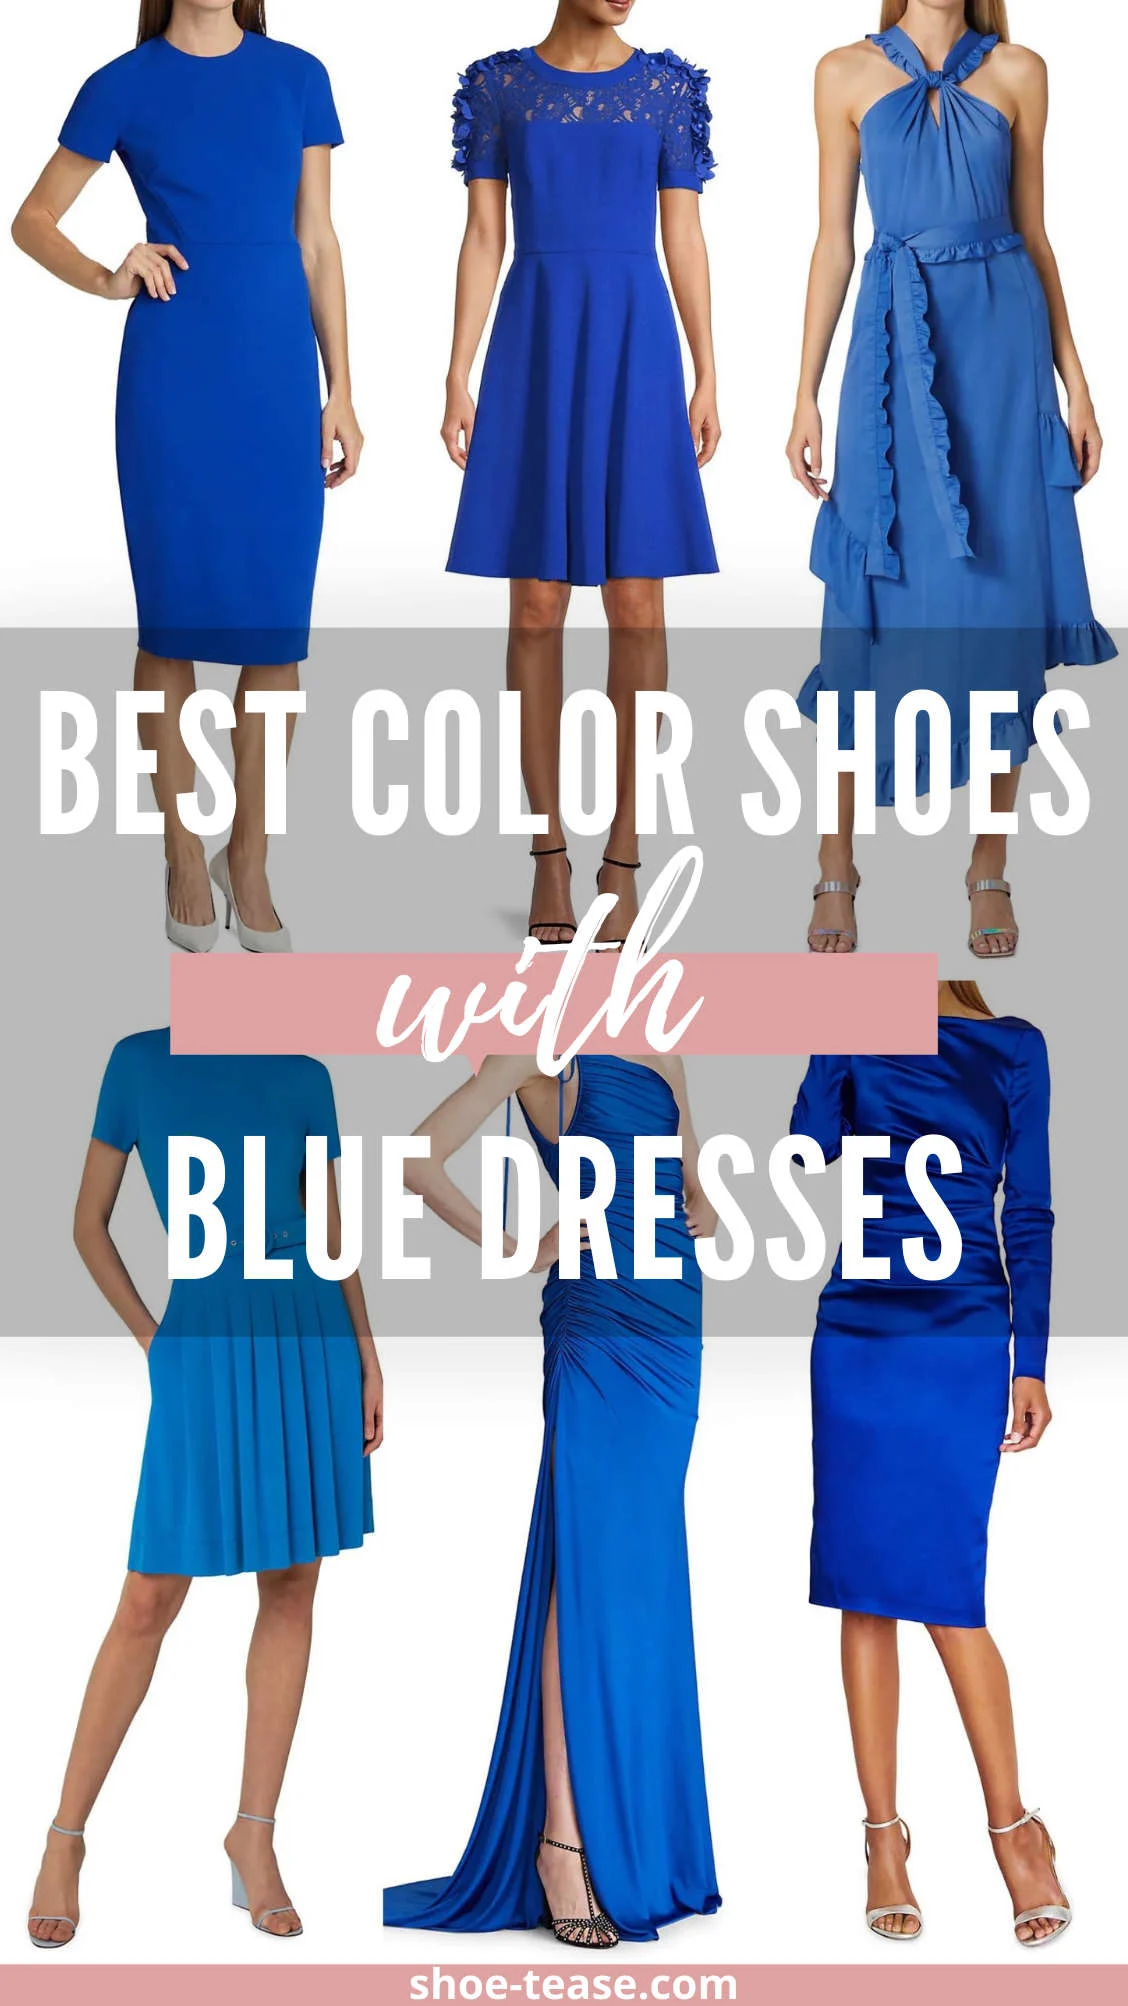 Shoes To Wear With A Blue Dress Content 2 .webp